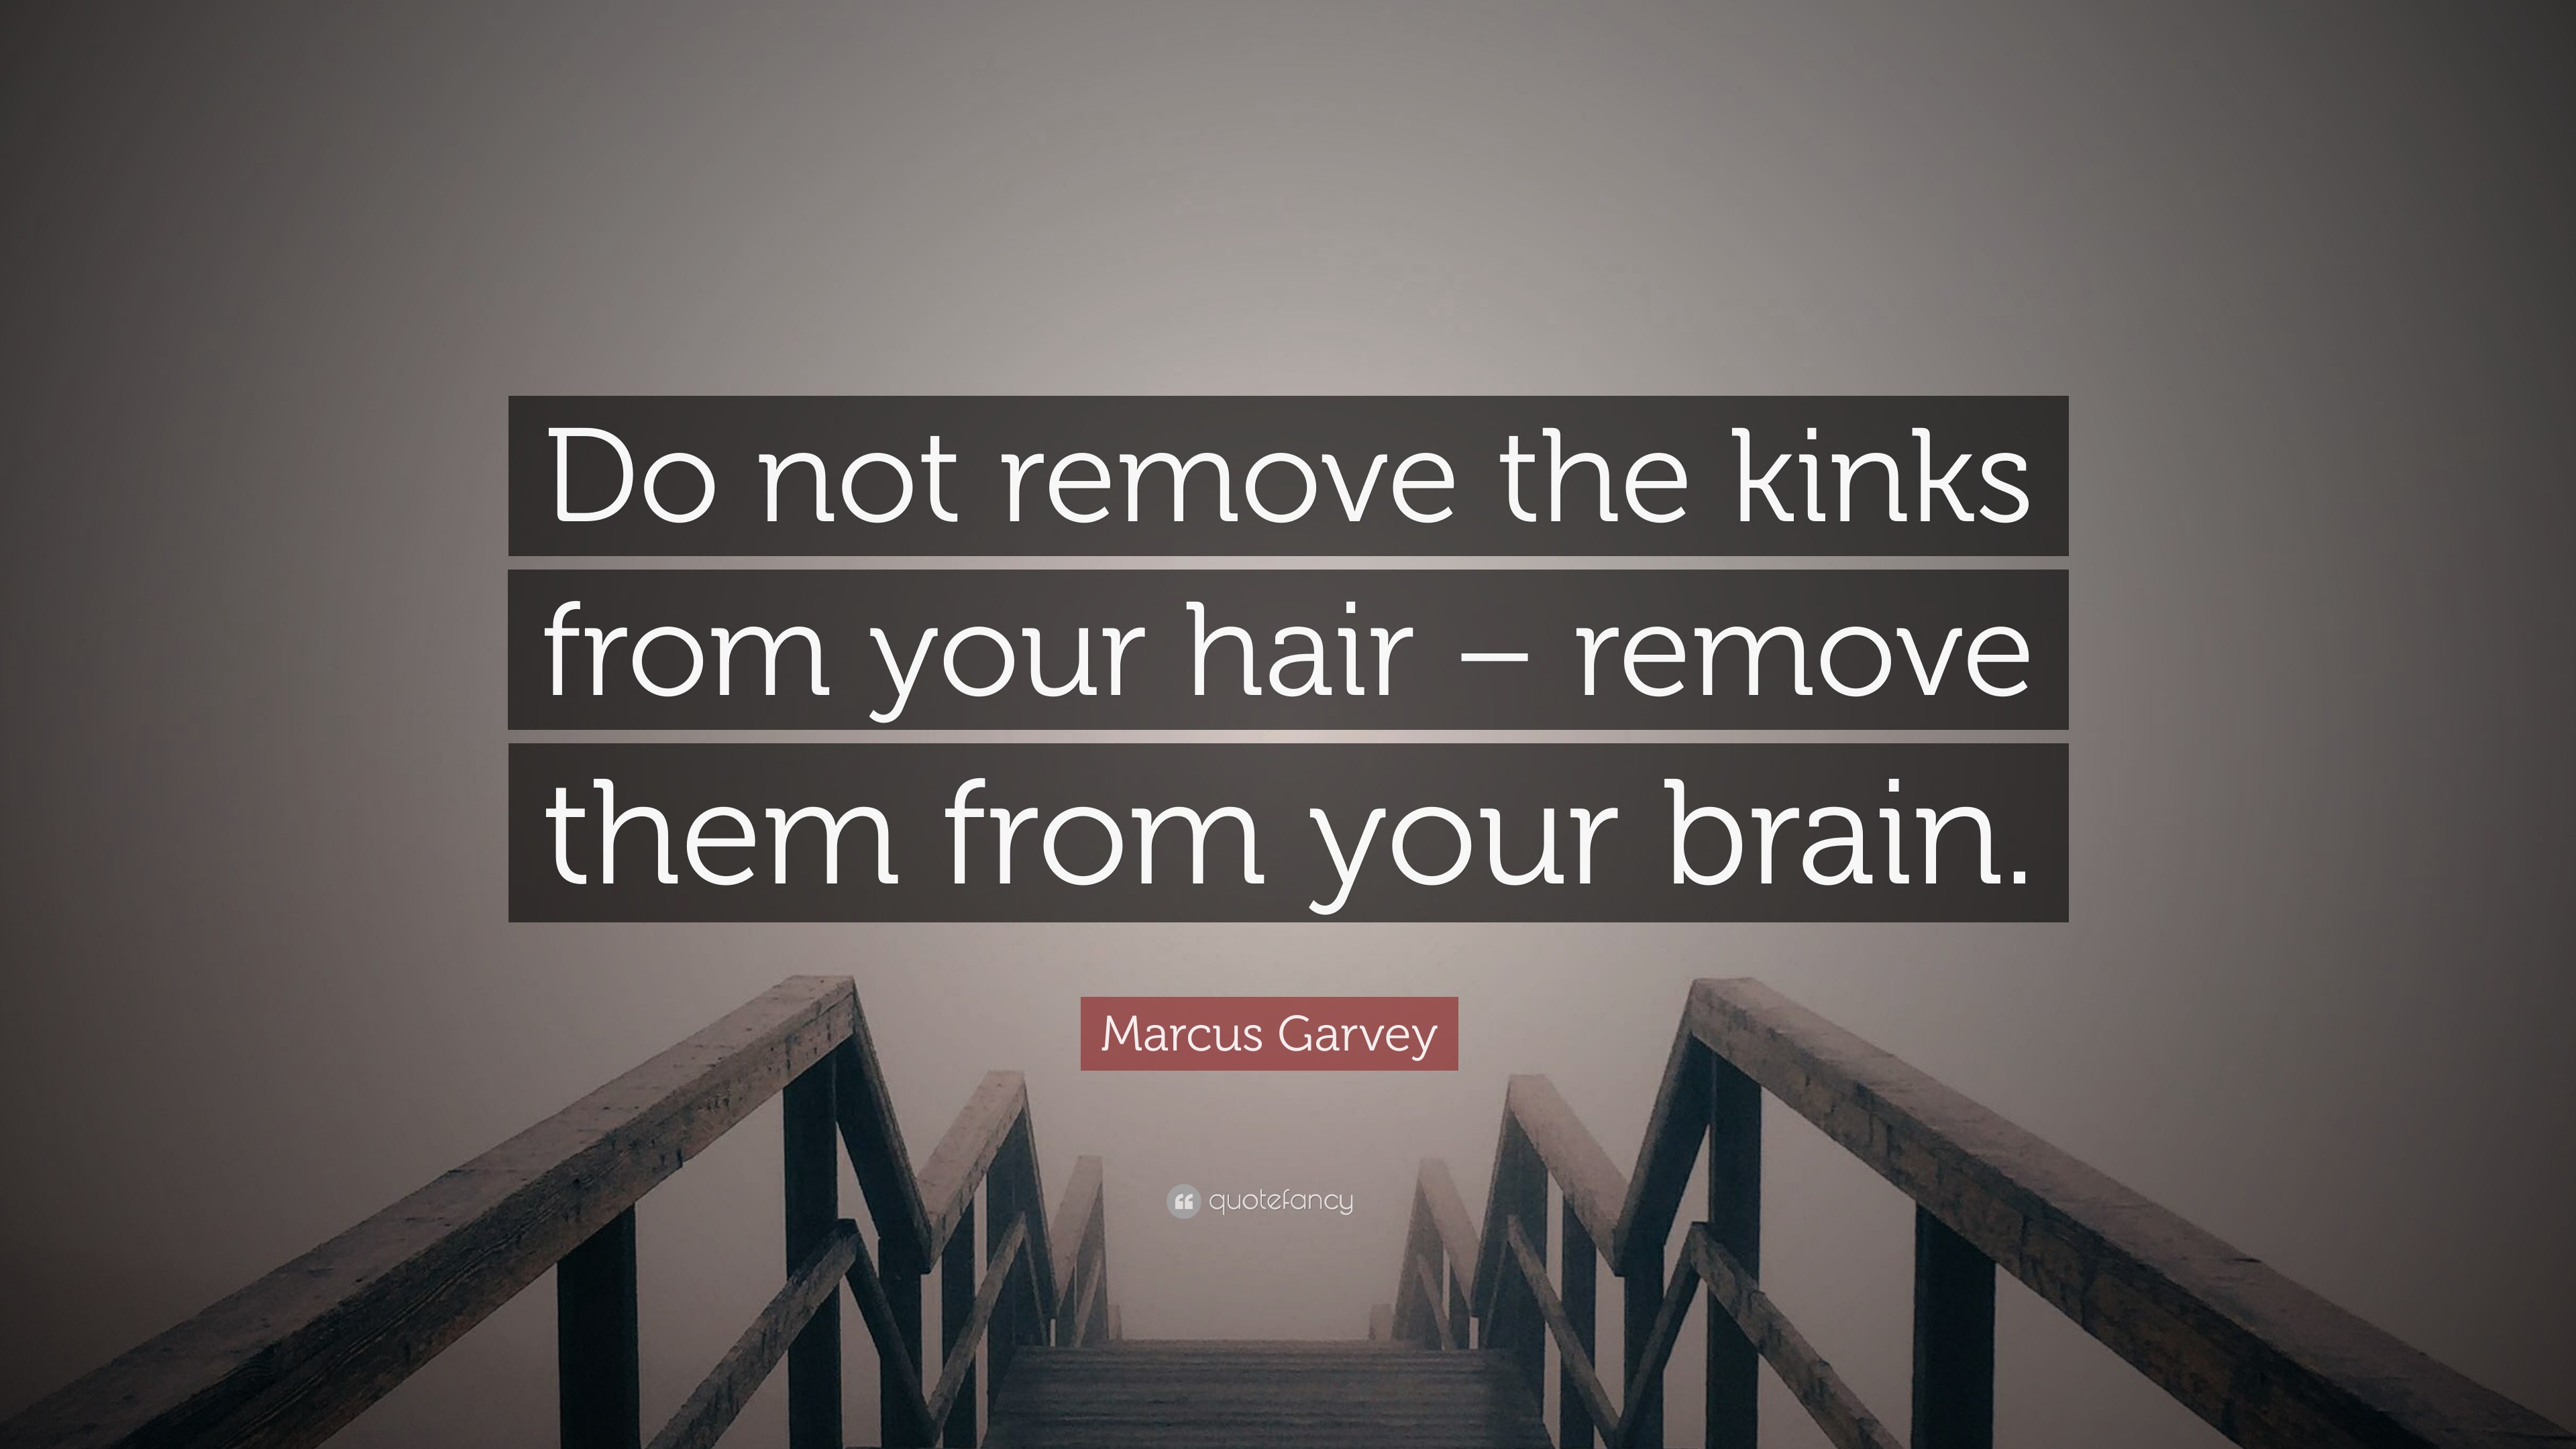 Marcus Garvey Quote: “Do Not Remove The Kinks From Your Hair – Remove Them From Your Brain.”